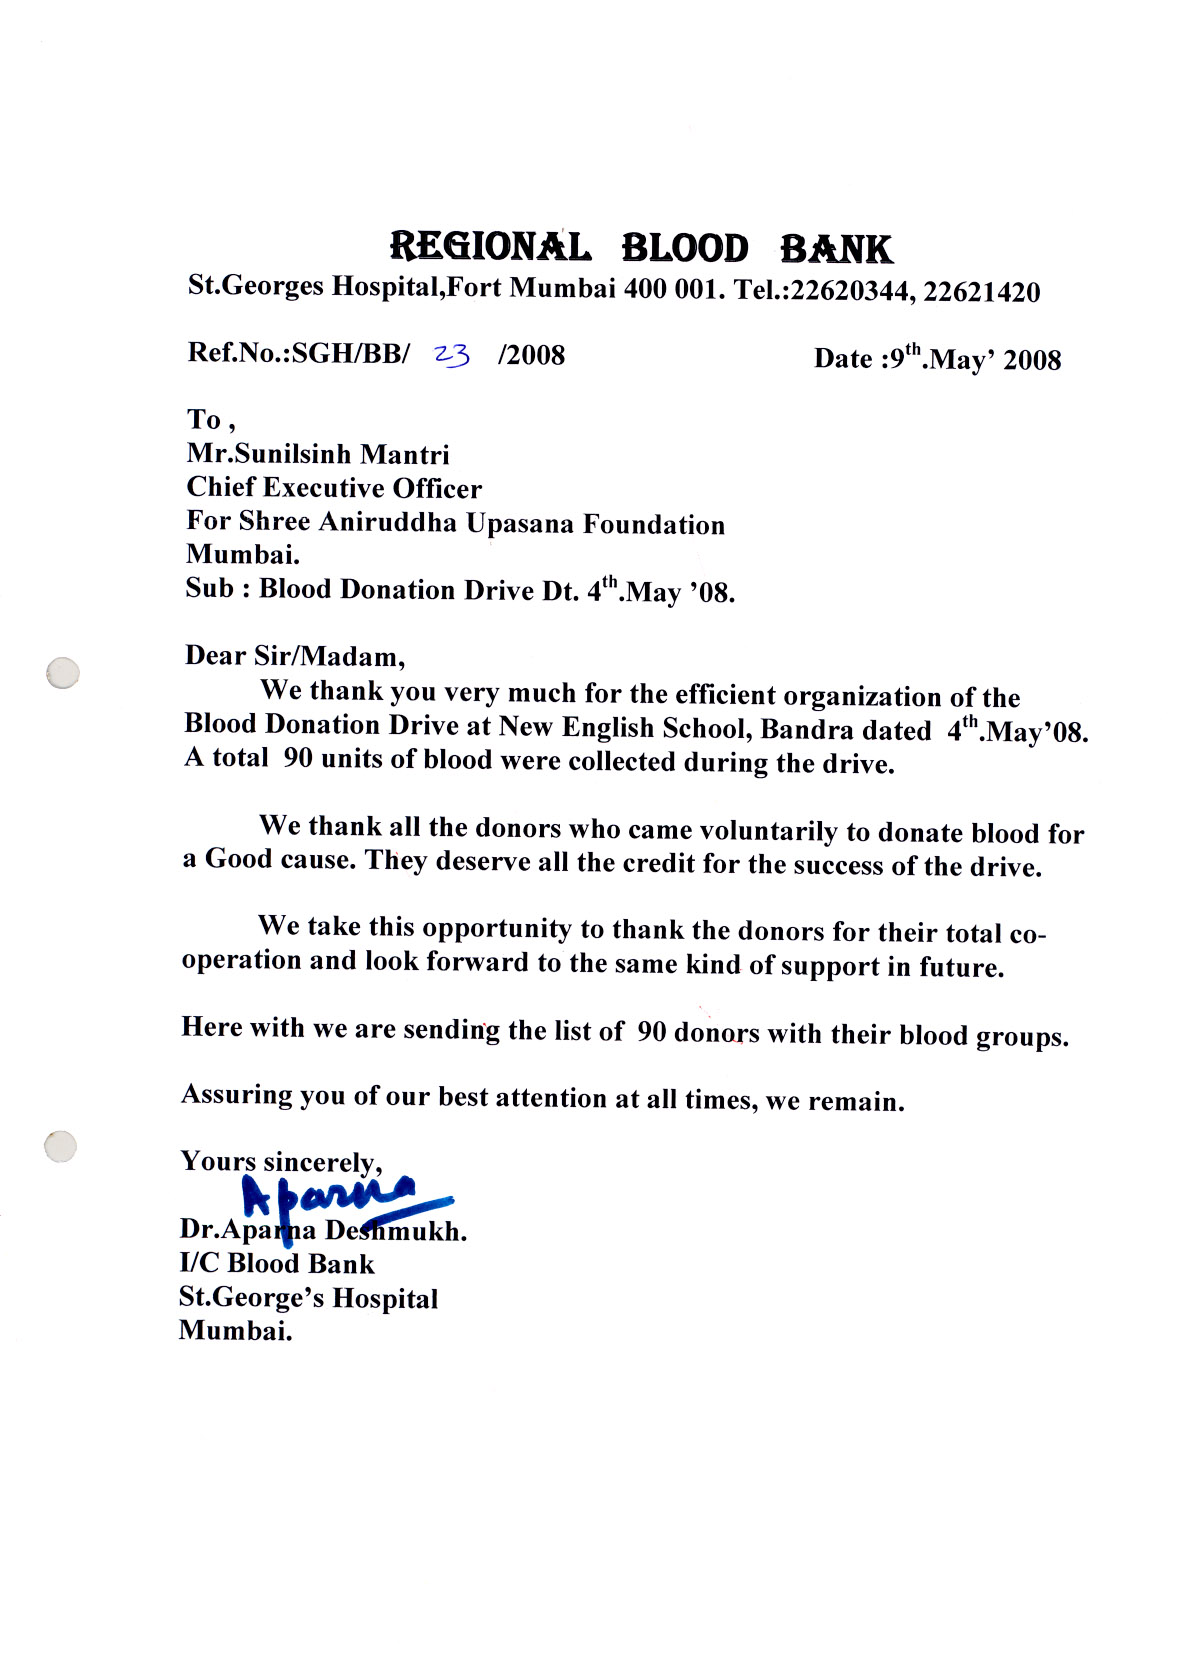 Appreciation-Letter from Regional Blood Bank 2008 -for-Aniruddhafoundation-Compassion-Social-services